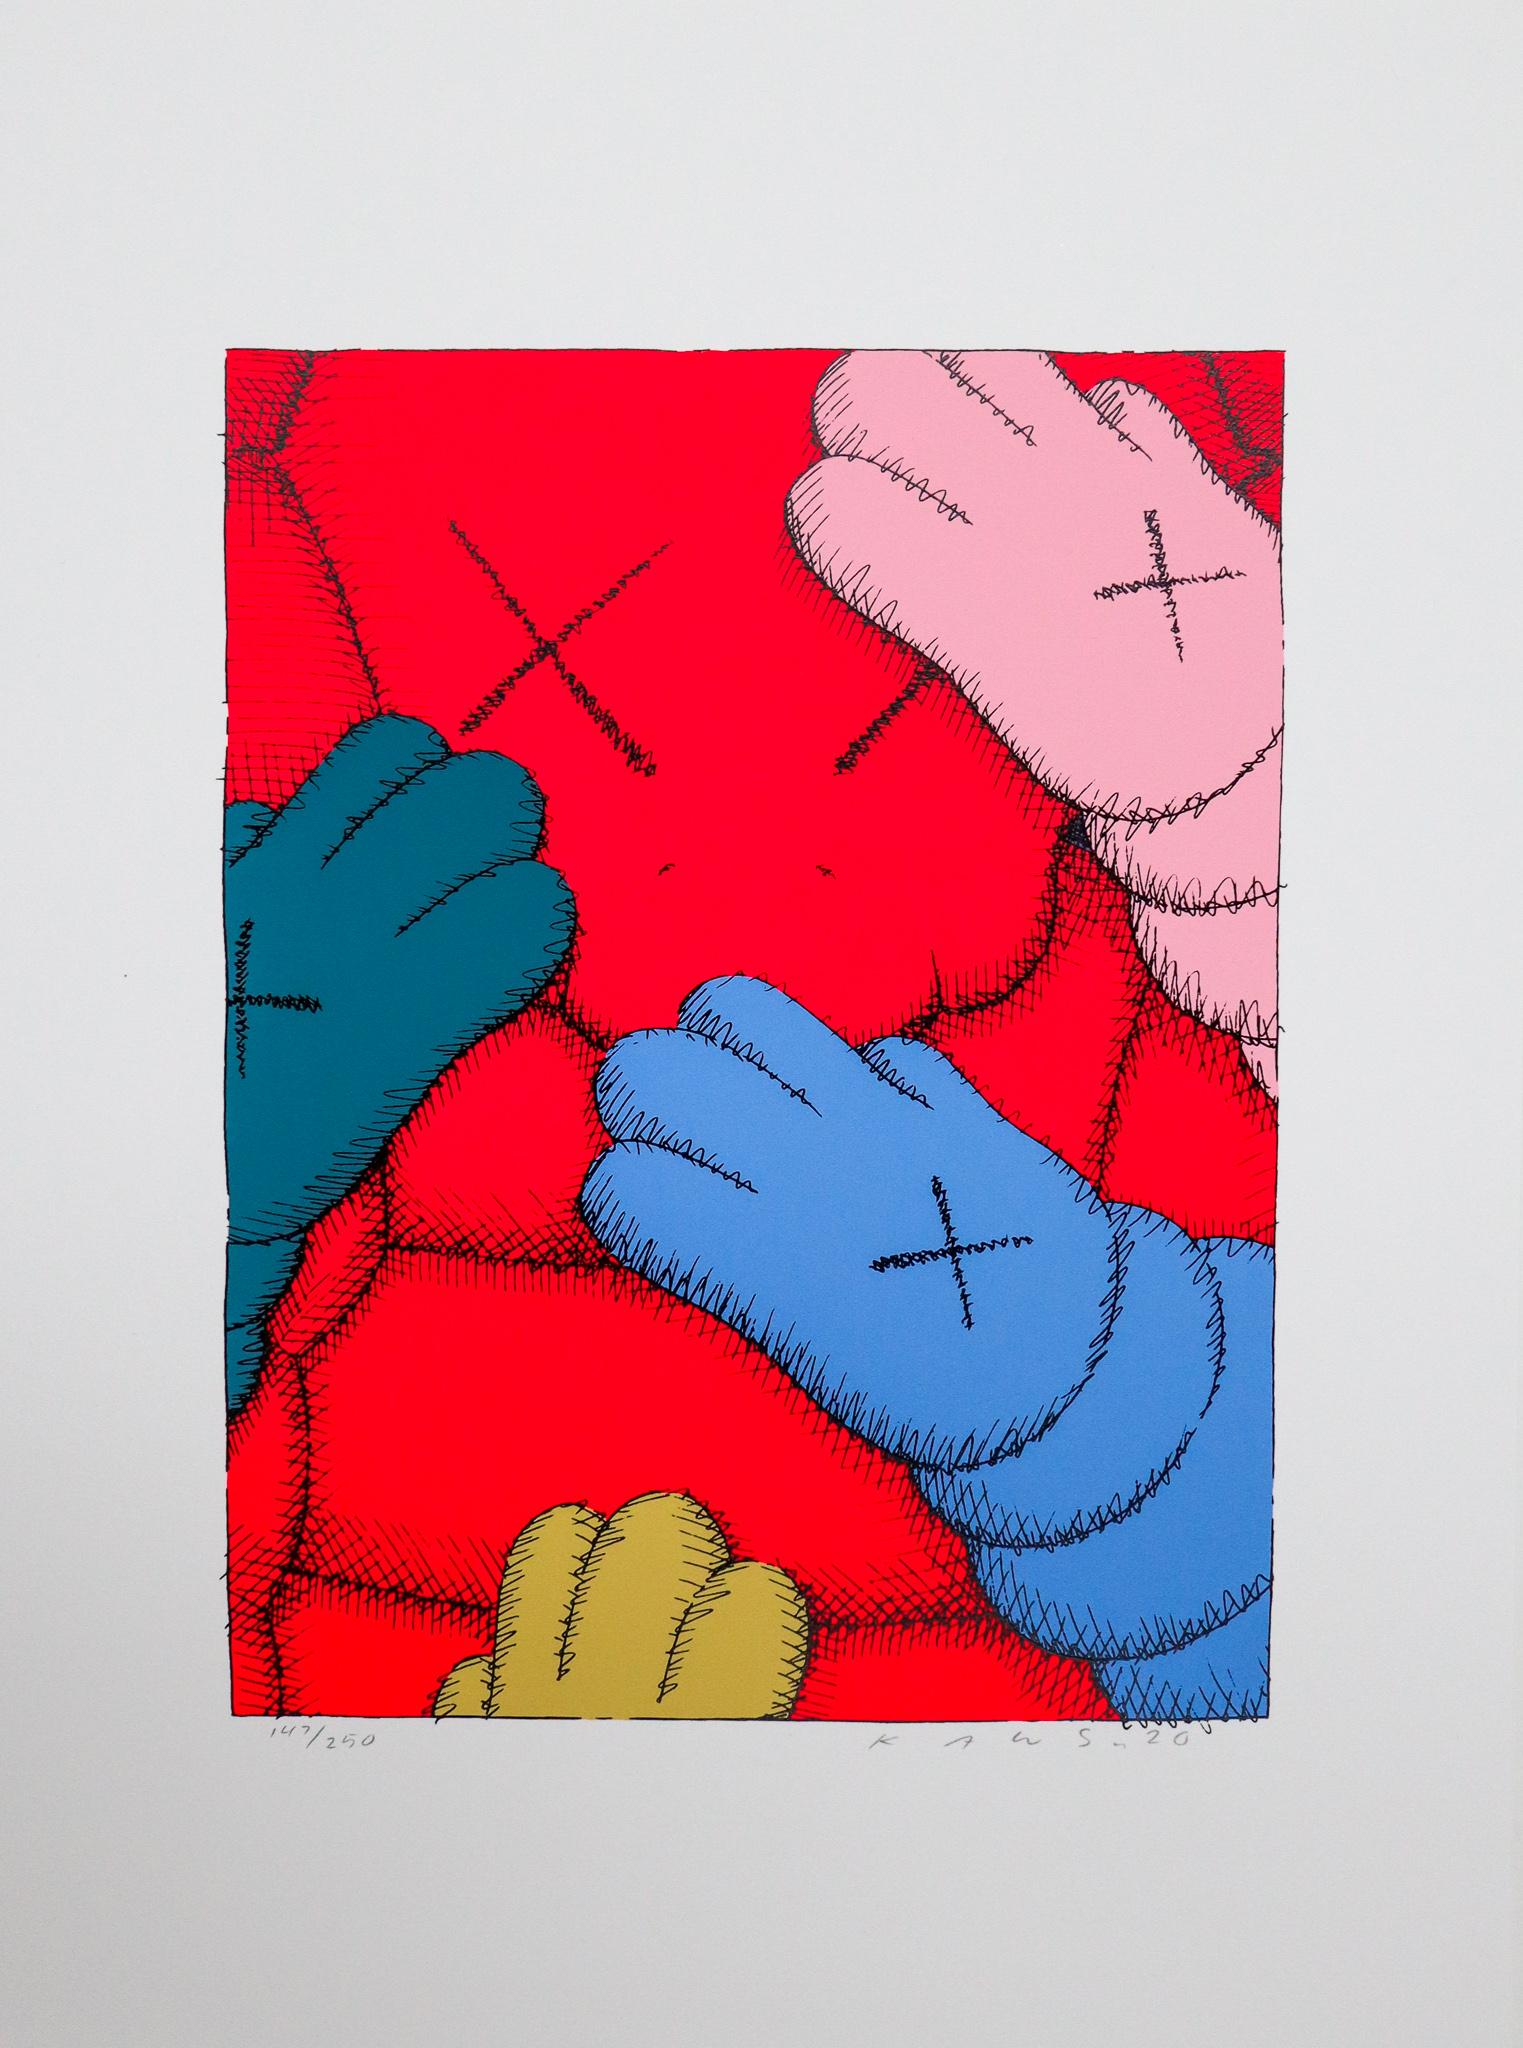 KAWS
Untitled from Urge (Red)
From the rare limited edition of 250
Original Screen print on paper
Hand signed and numbered
MINT Condition
